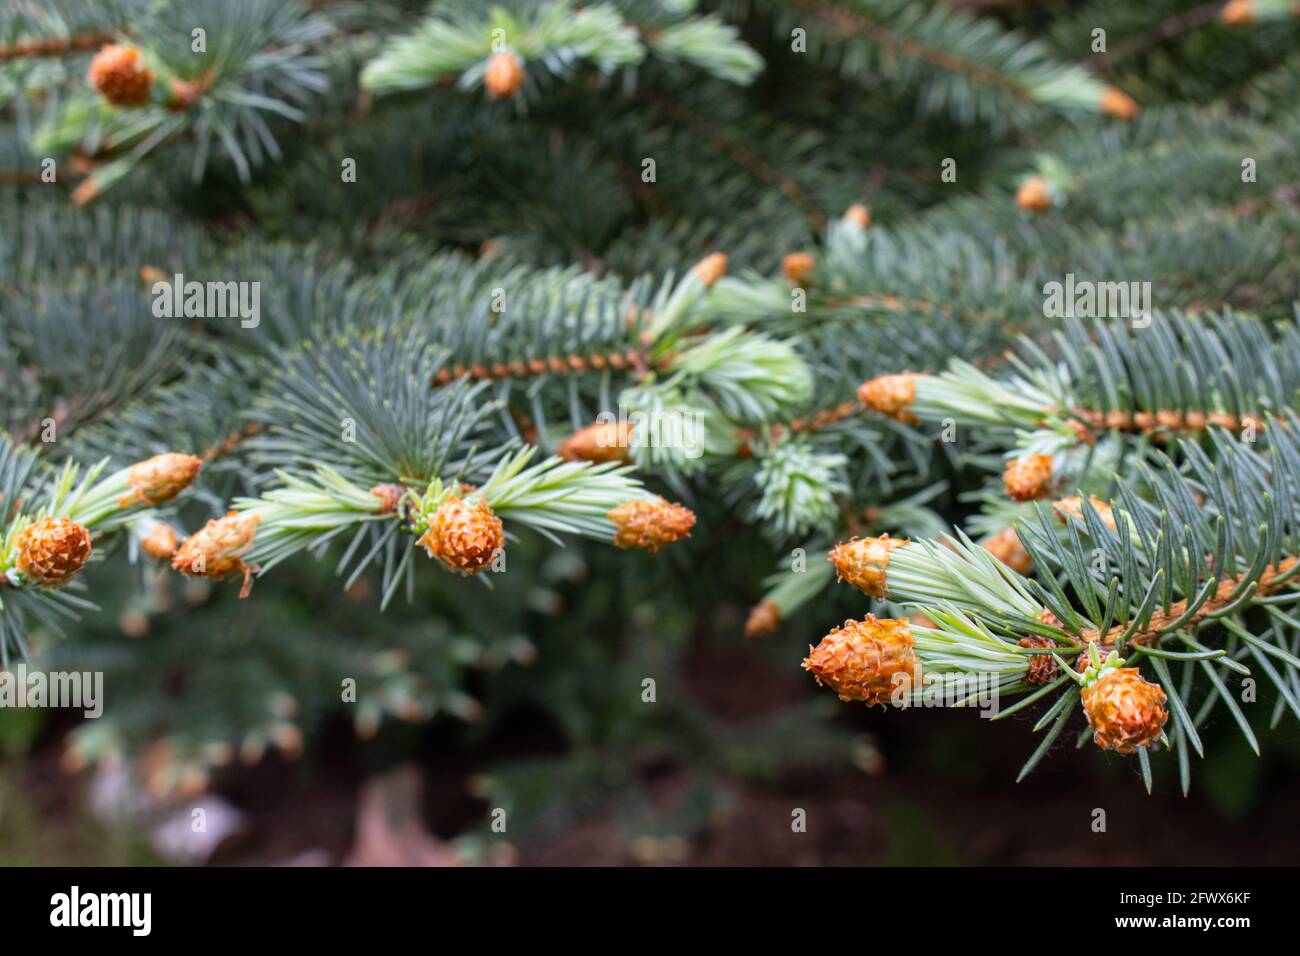 Young shoots of blue spruce Stock Photo